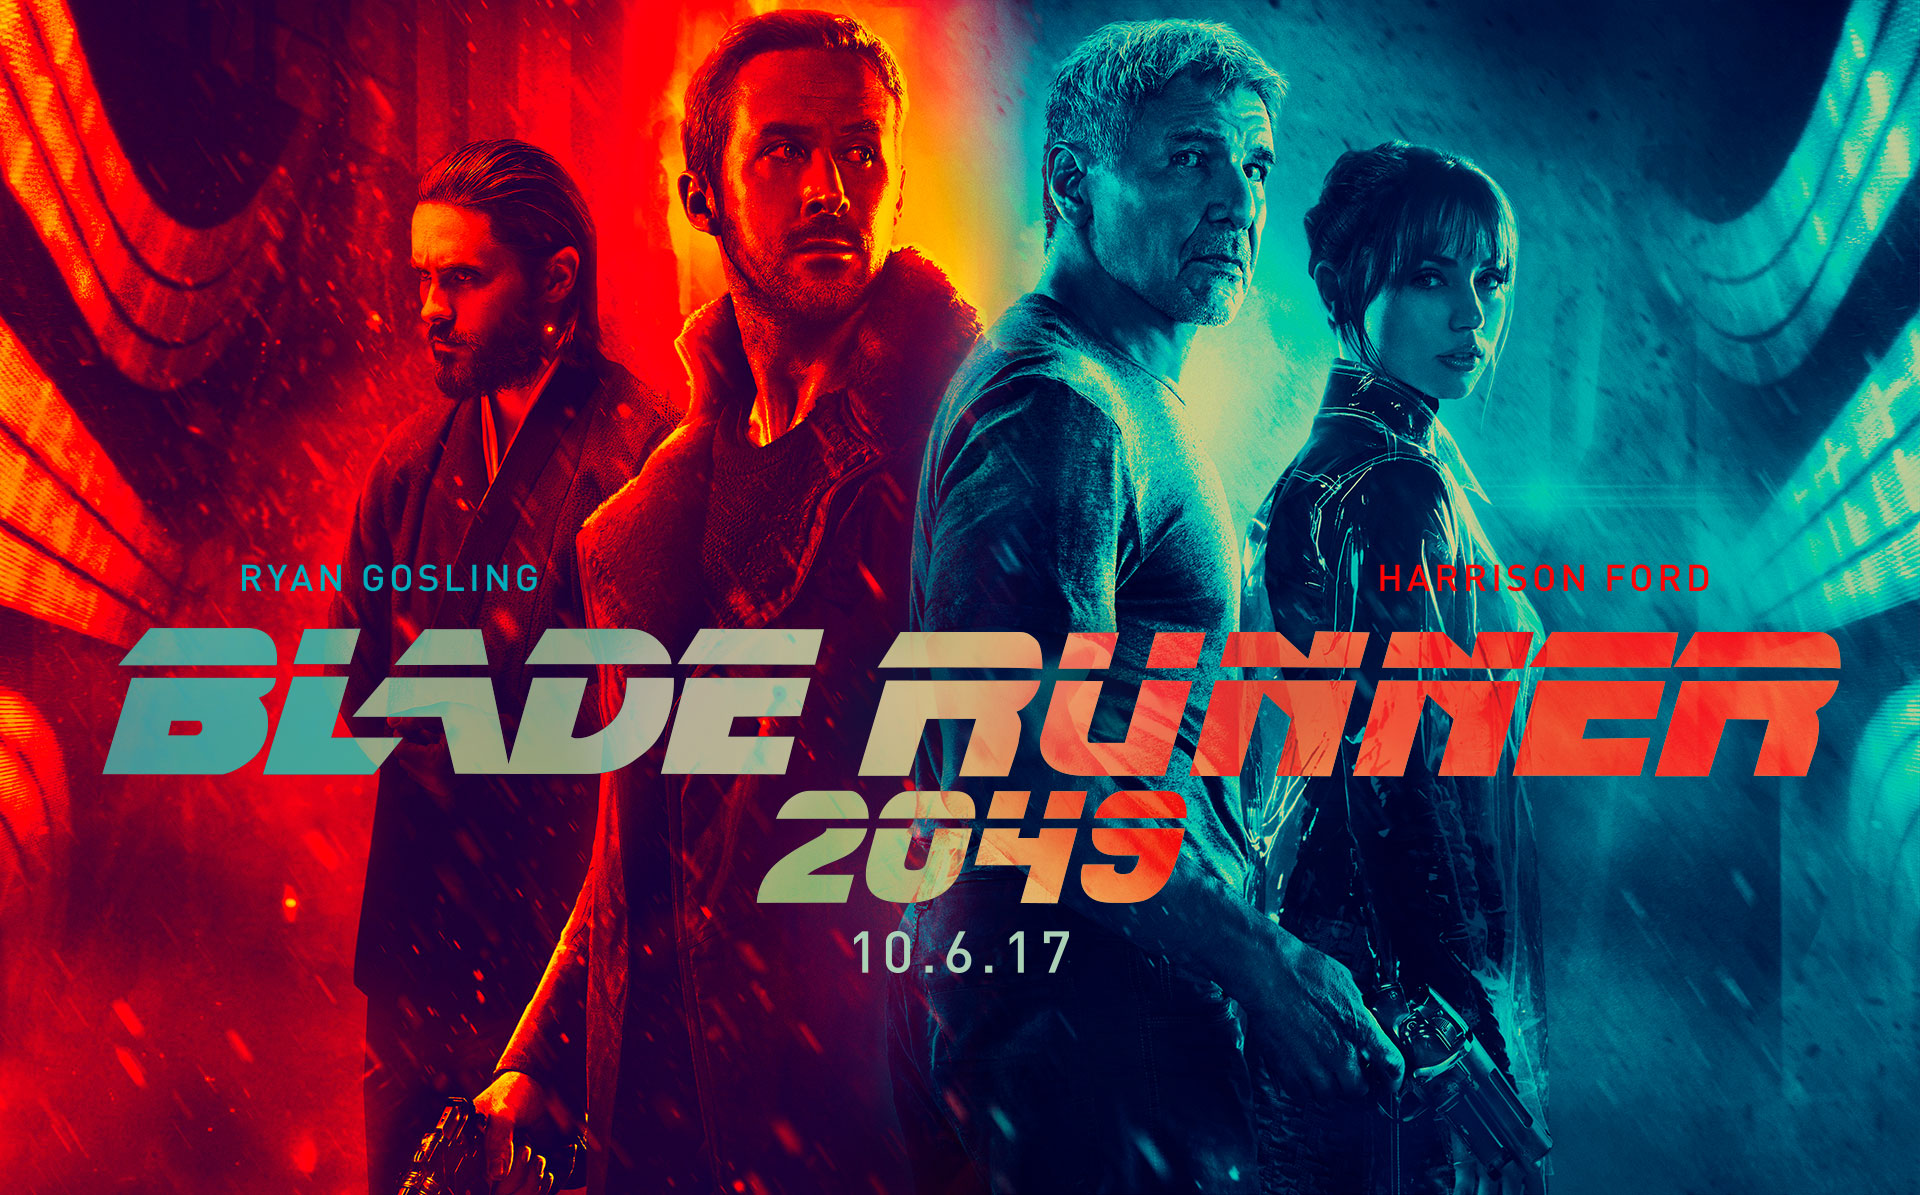 Blade Runner 2049 is drawn-out, but impressive